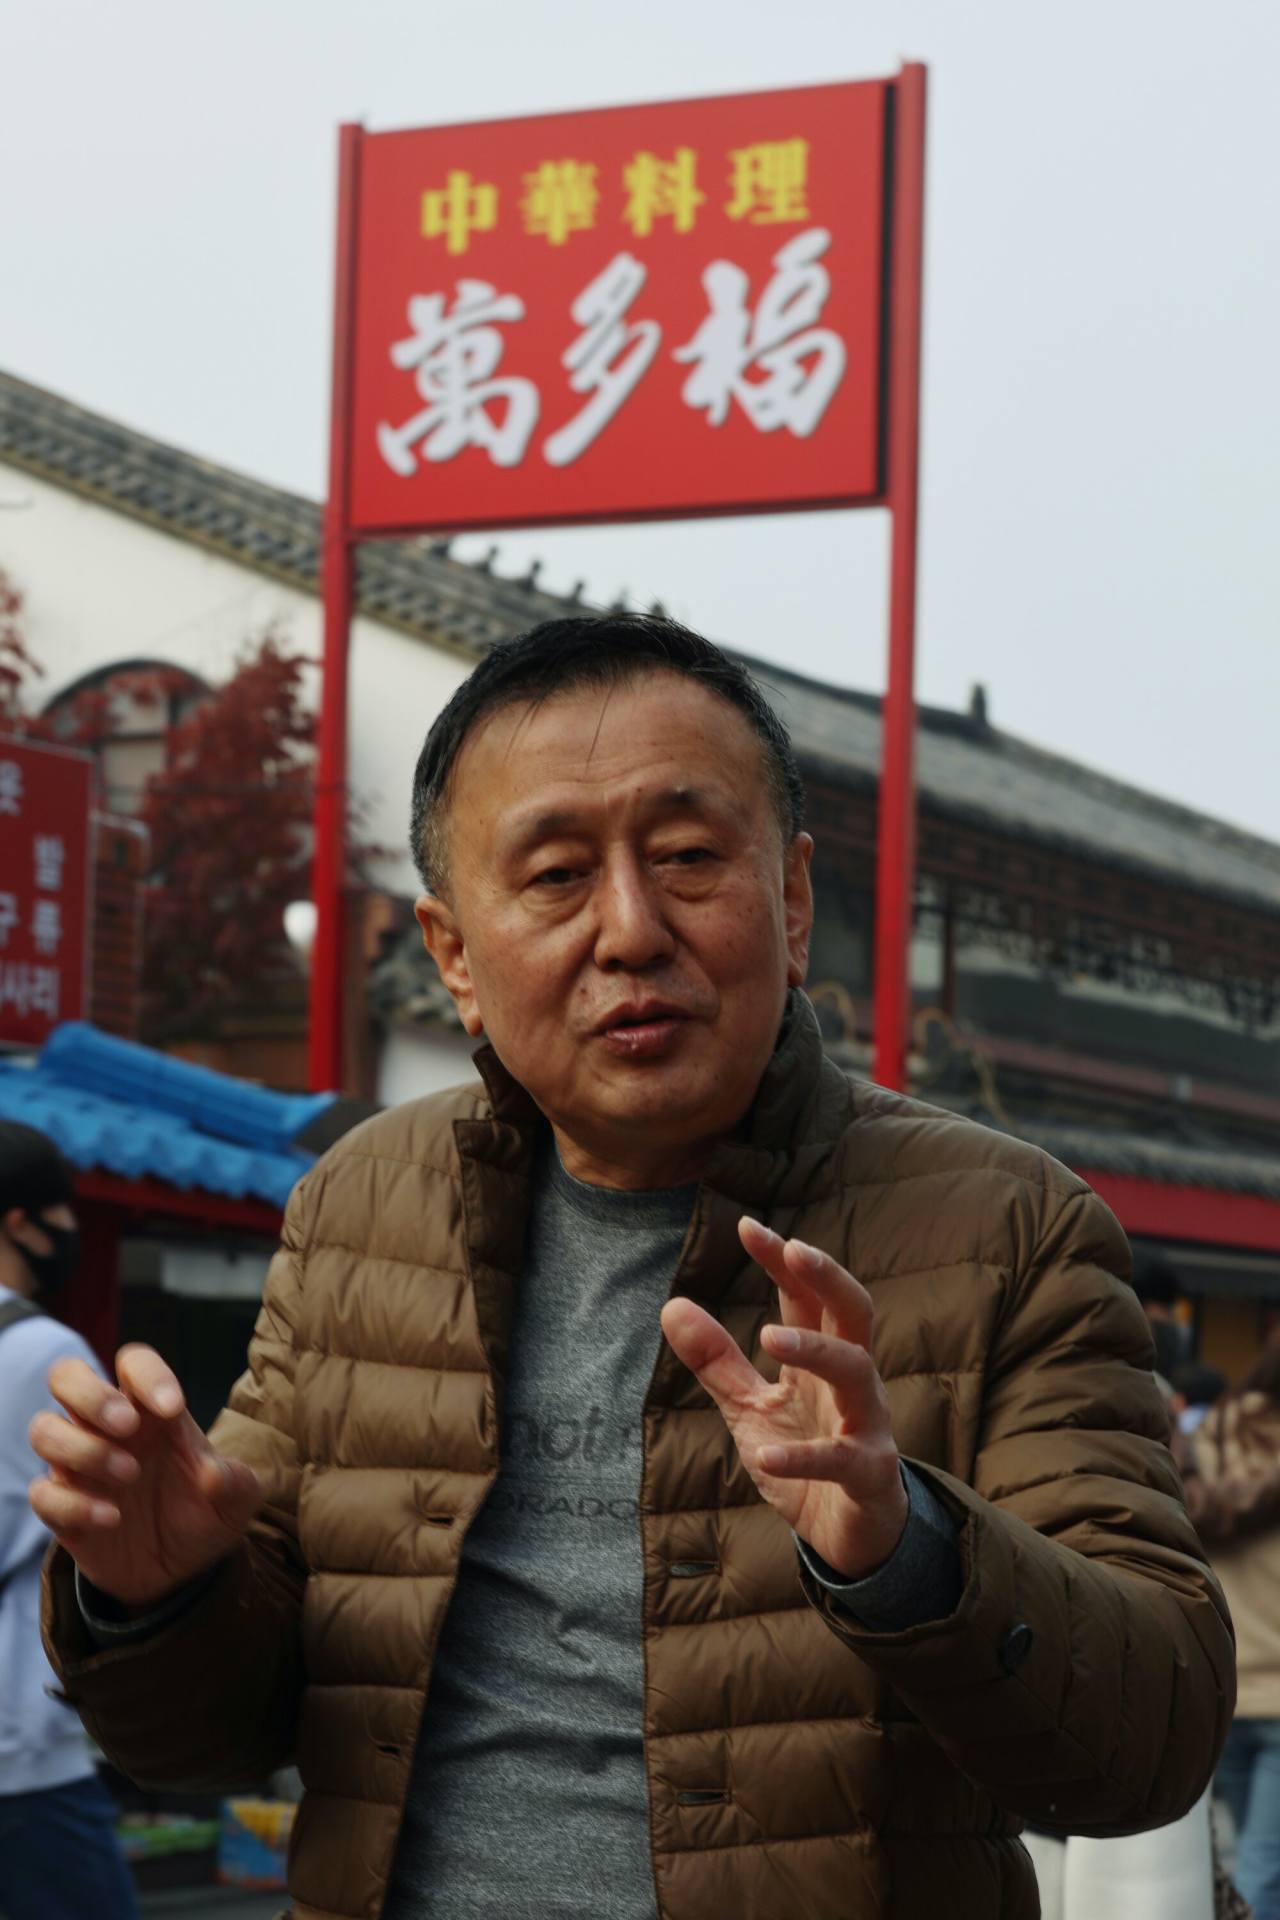 Seo Hak-bo, 62, is a second-generation Korean Chinese restaurateur, descended from an immigrant from Shandong Province, China. Photo © Hyungwon Kang